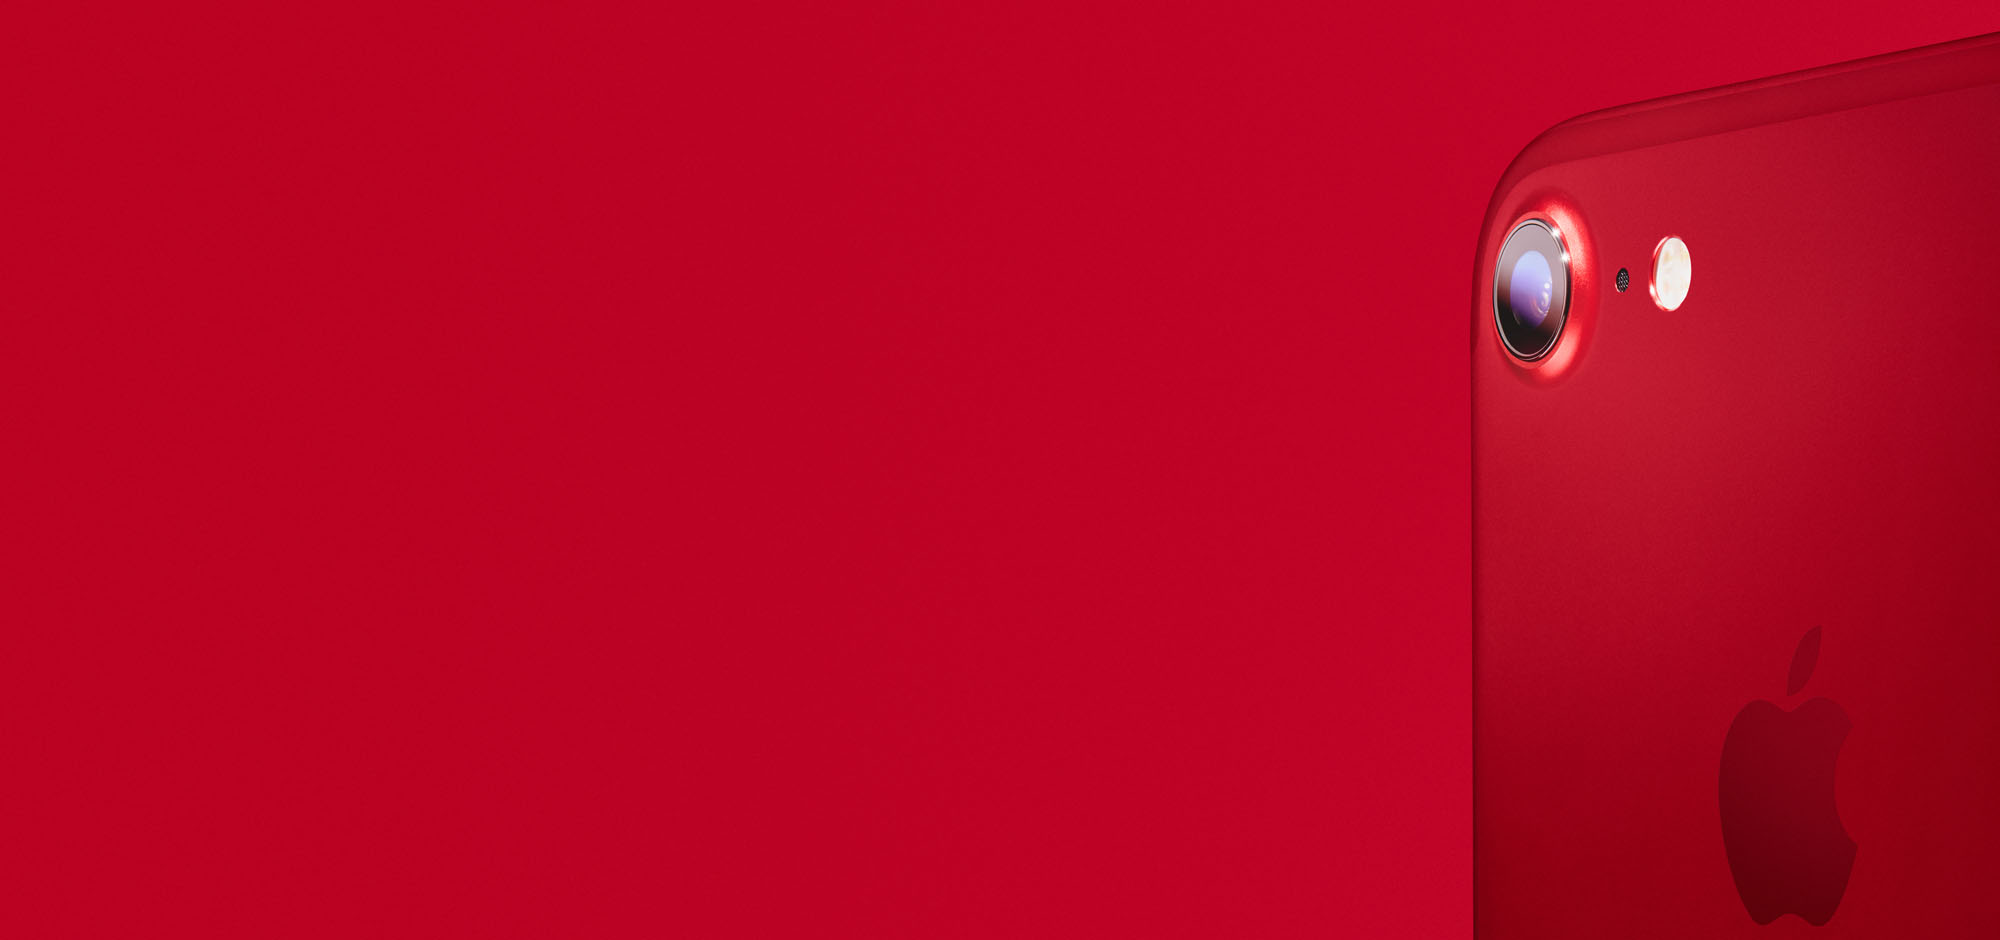 Product (RED) 